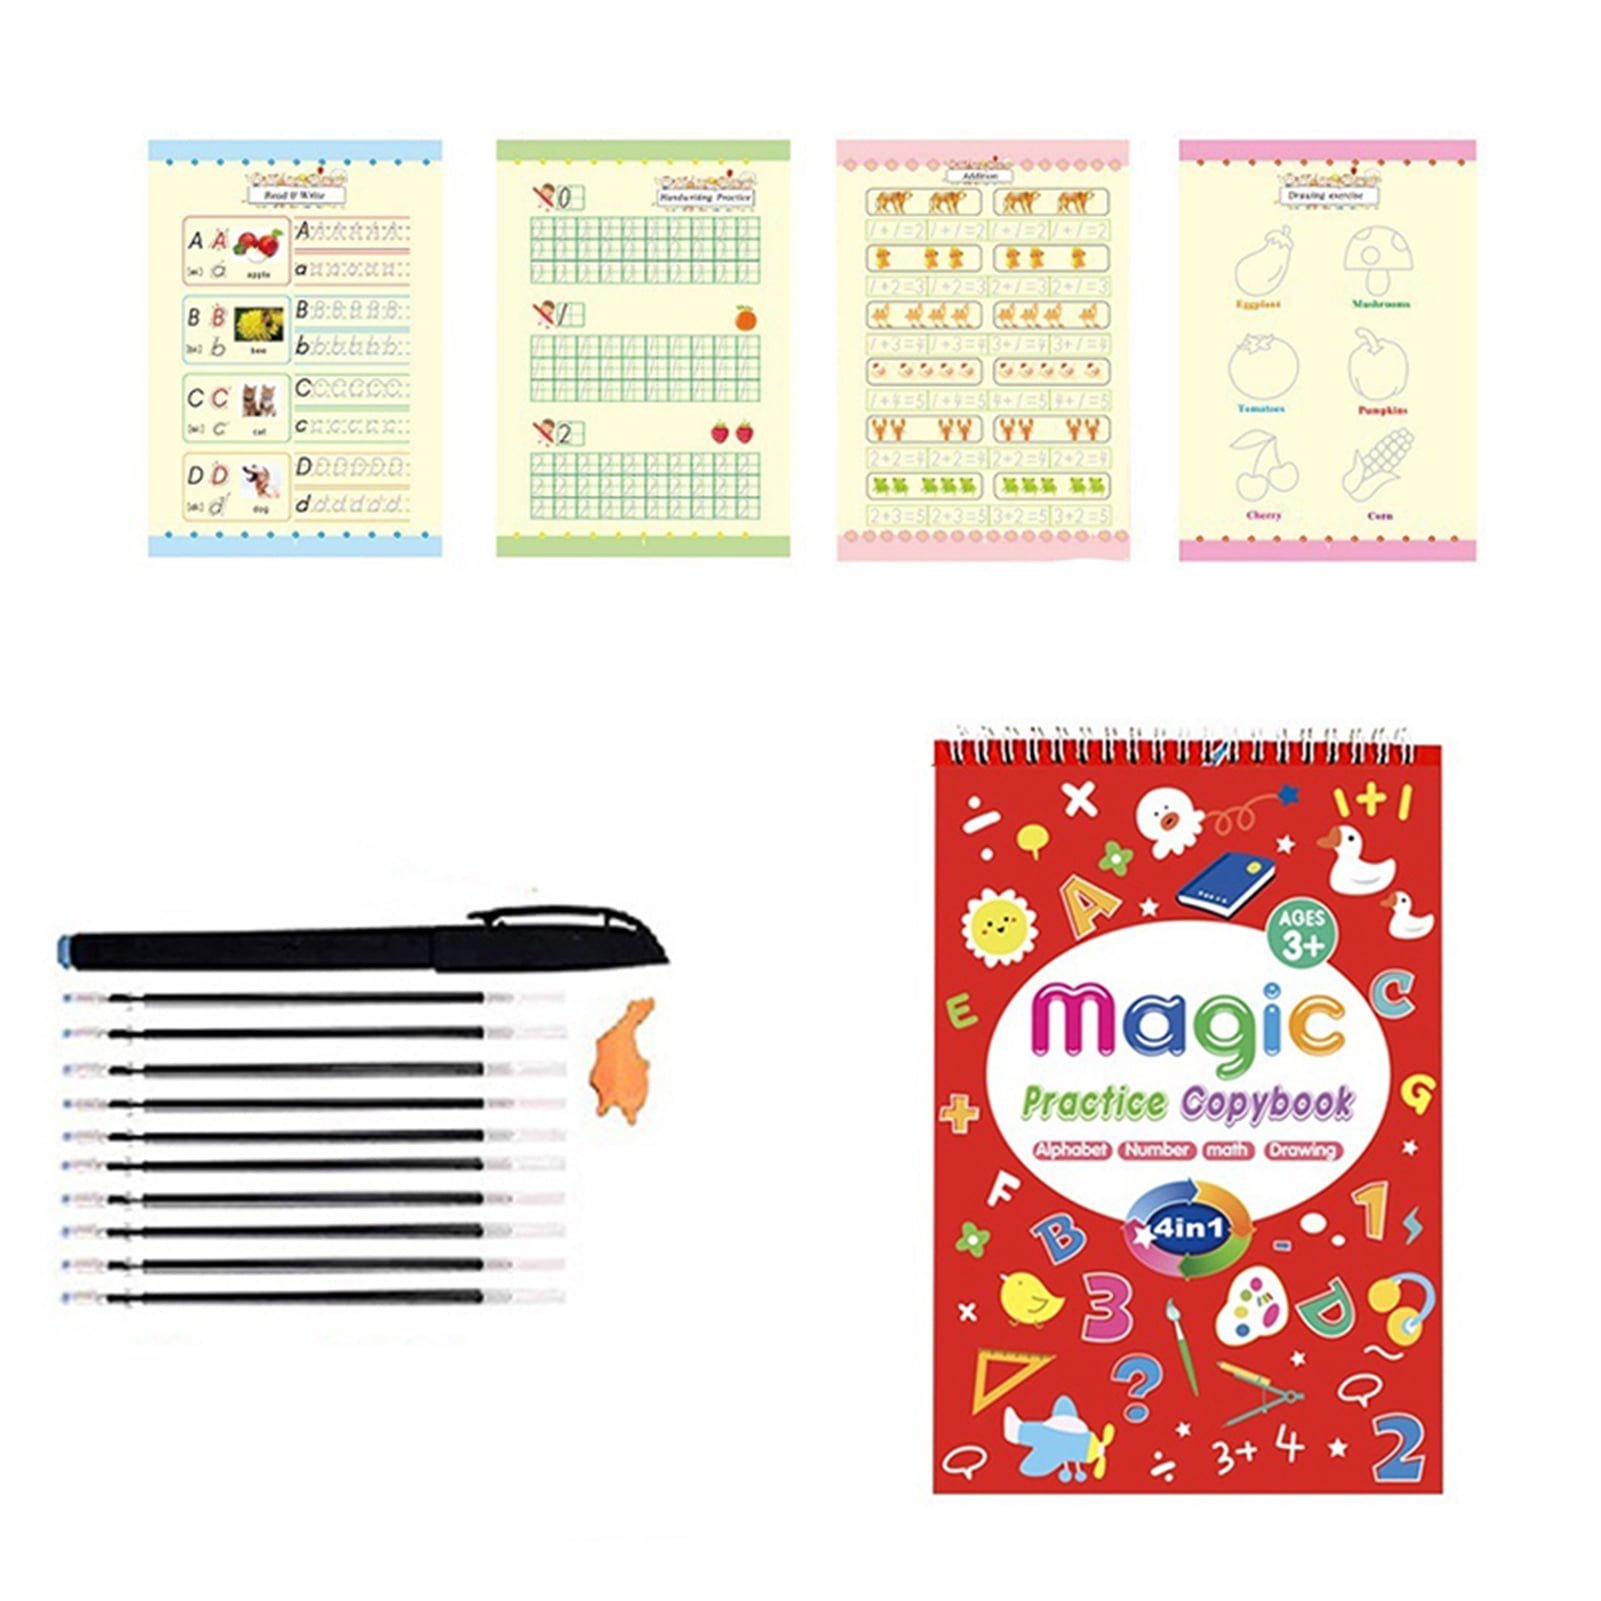 Books and Pen Aenmt 4 Pcs English Magic Practice Copybook for Kids,Reusable Copybook with Magical Pen,Alphabet-Drawing-Number-Math-learning 